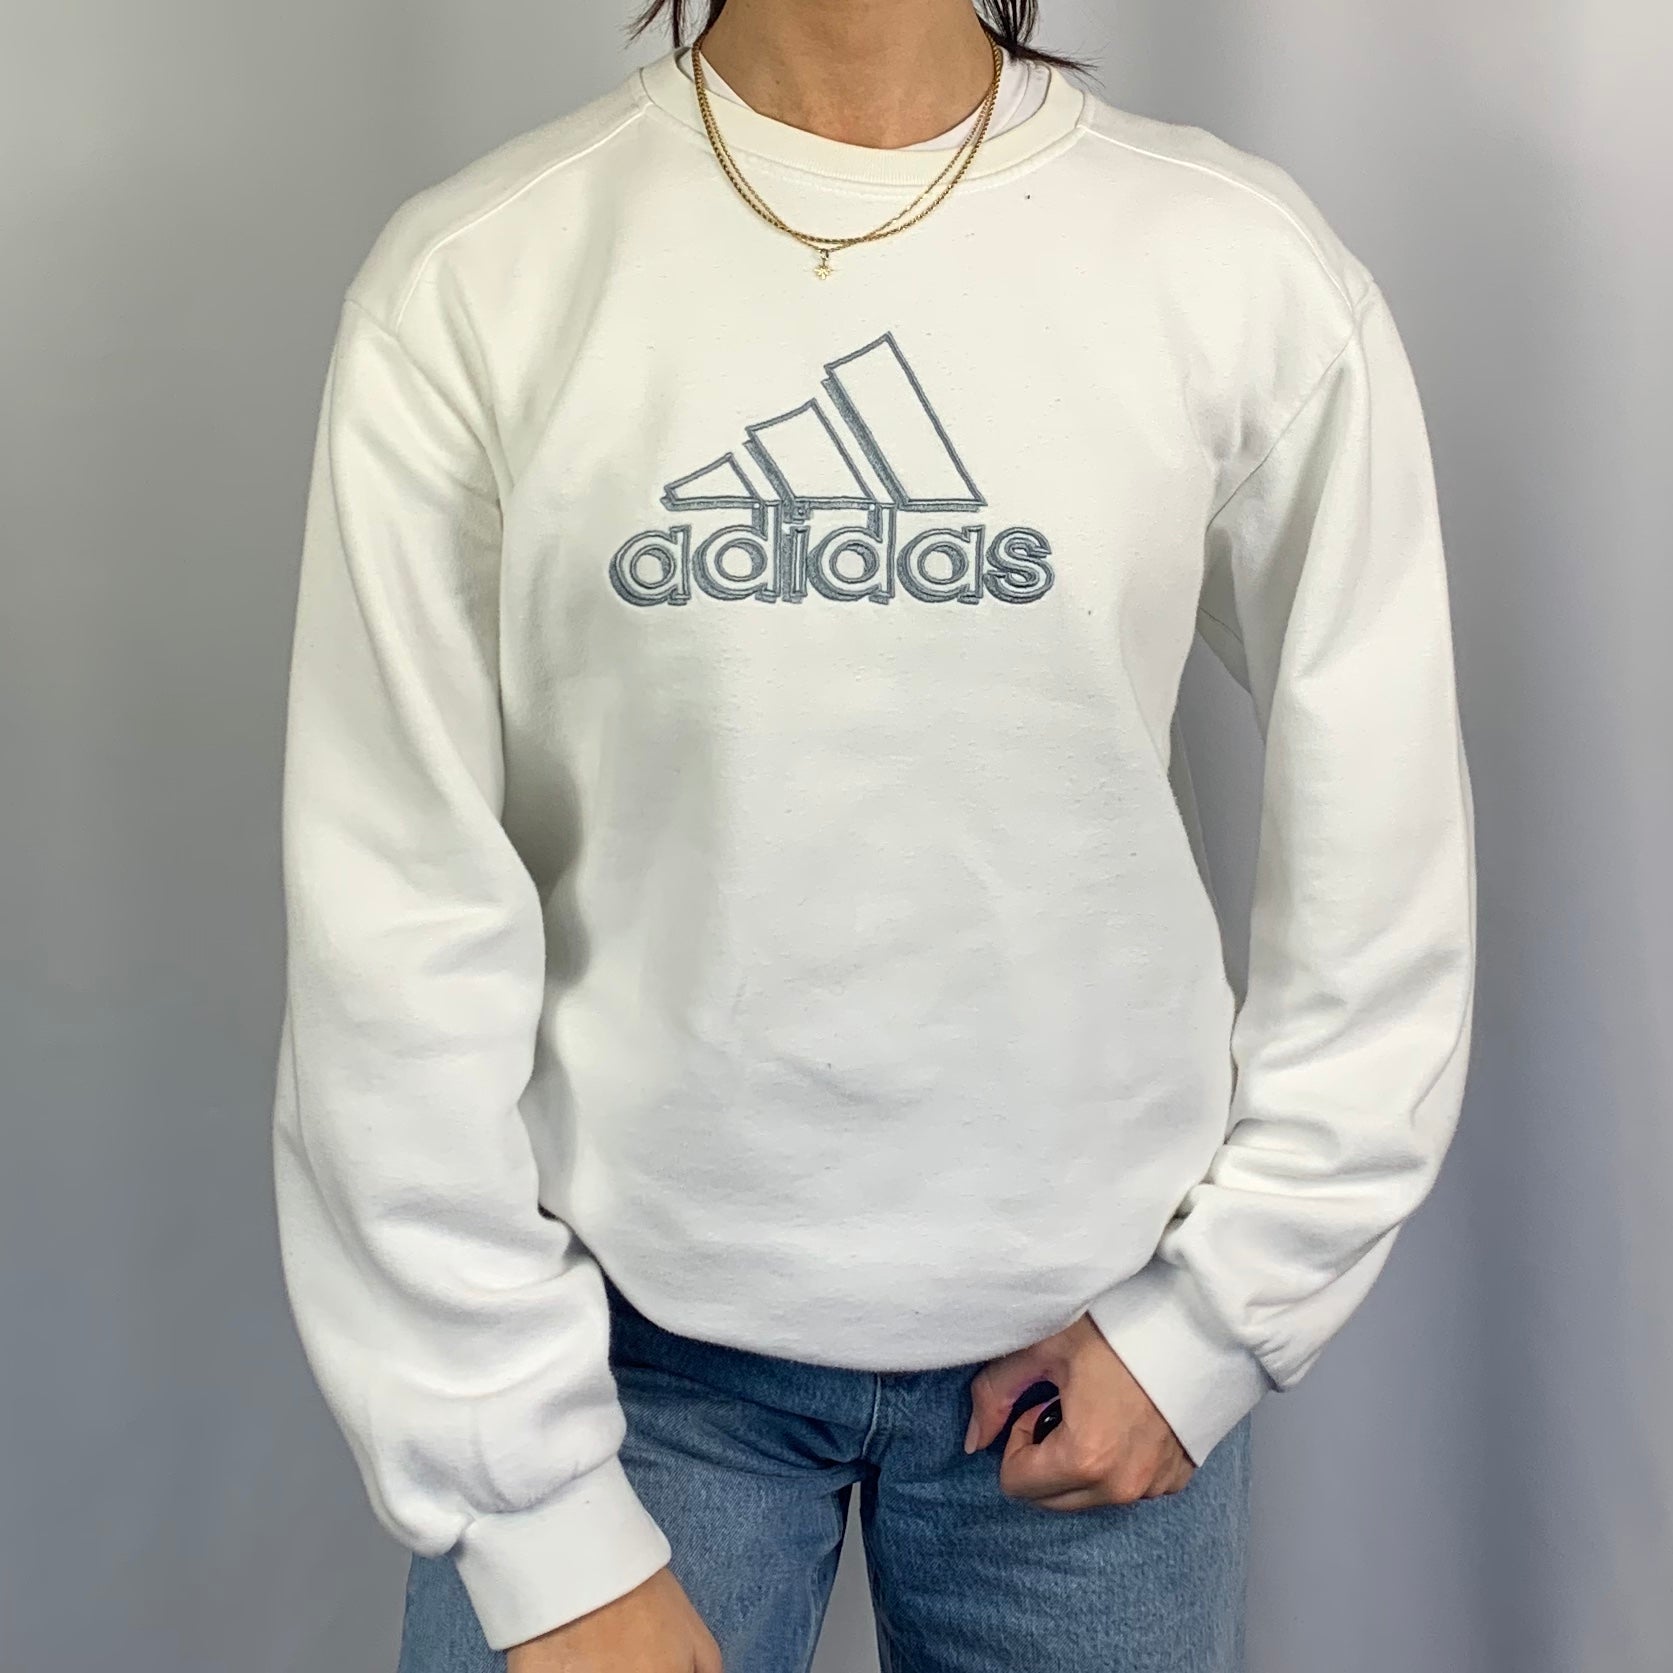 VINTAGE ADIDAS SWEATSHIRT WITH EMBROIDERED LOGO - Women's Large/Men's Small